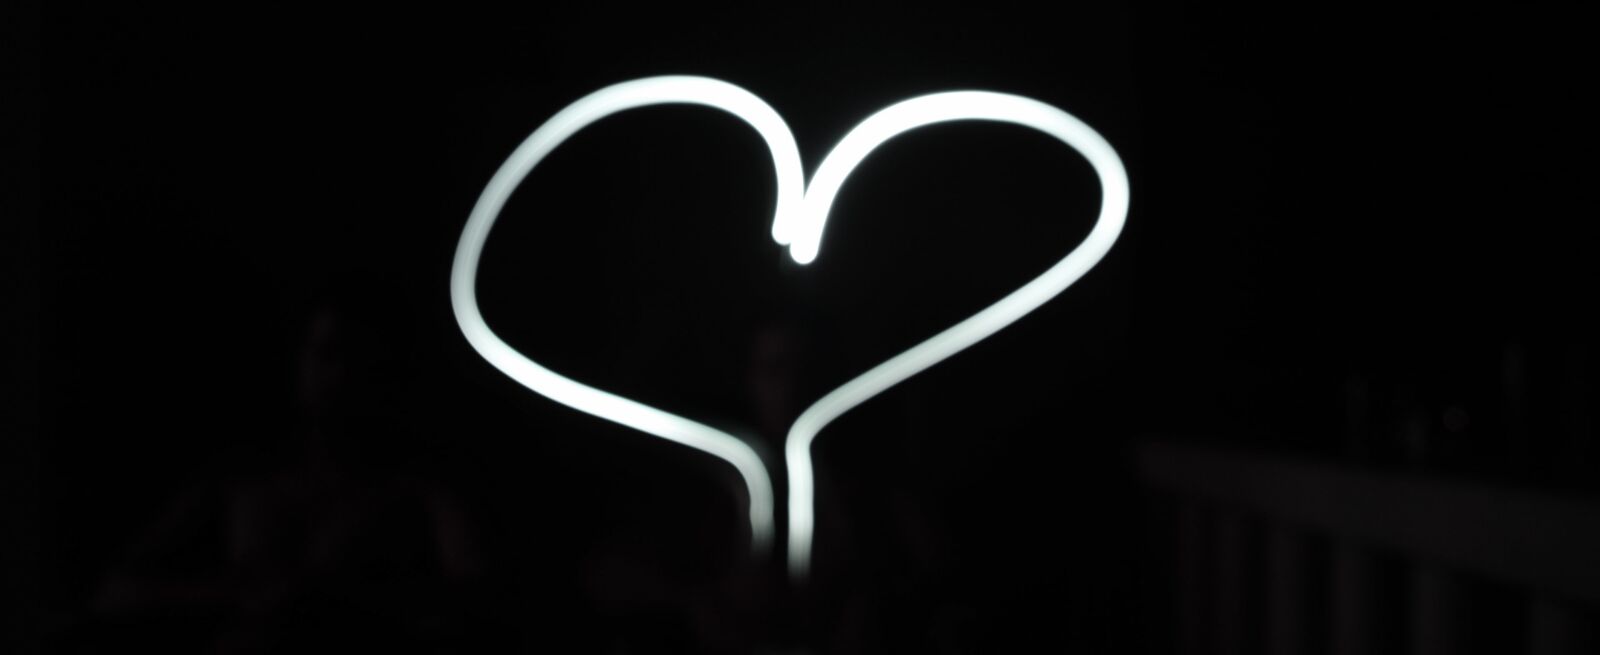 Nokia 808 PureView sample photo. Heart, silhouette, romance photography